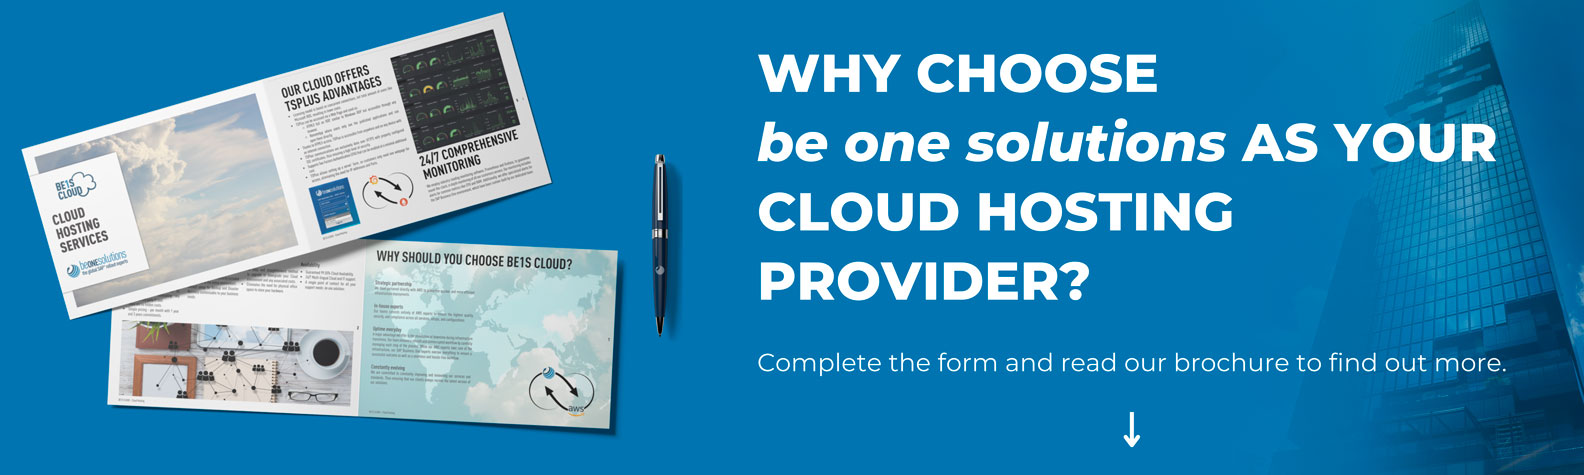 cloud hosting by be one solutions